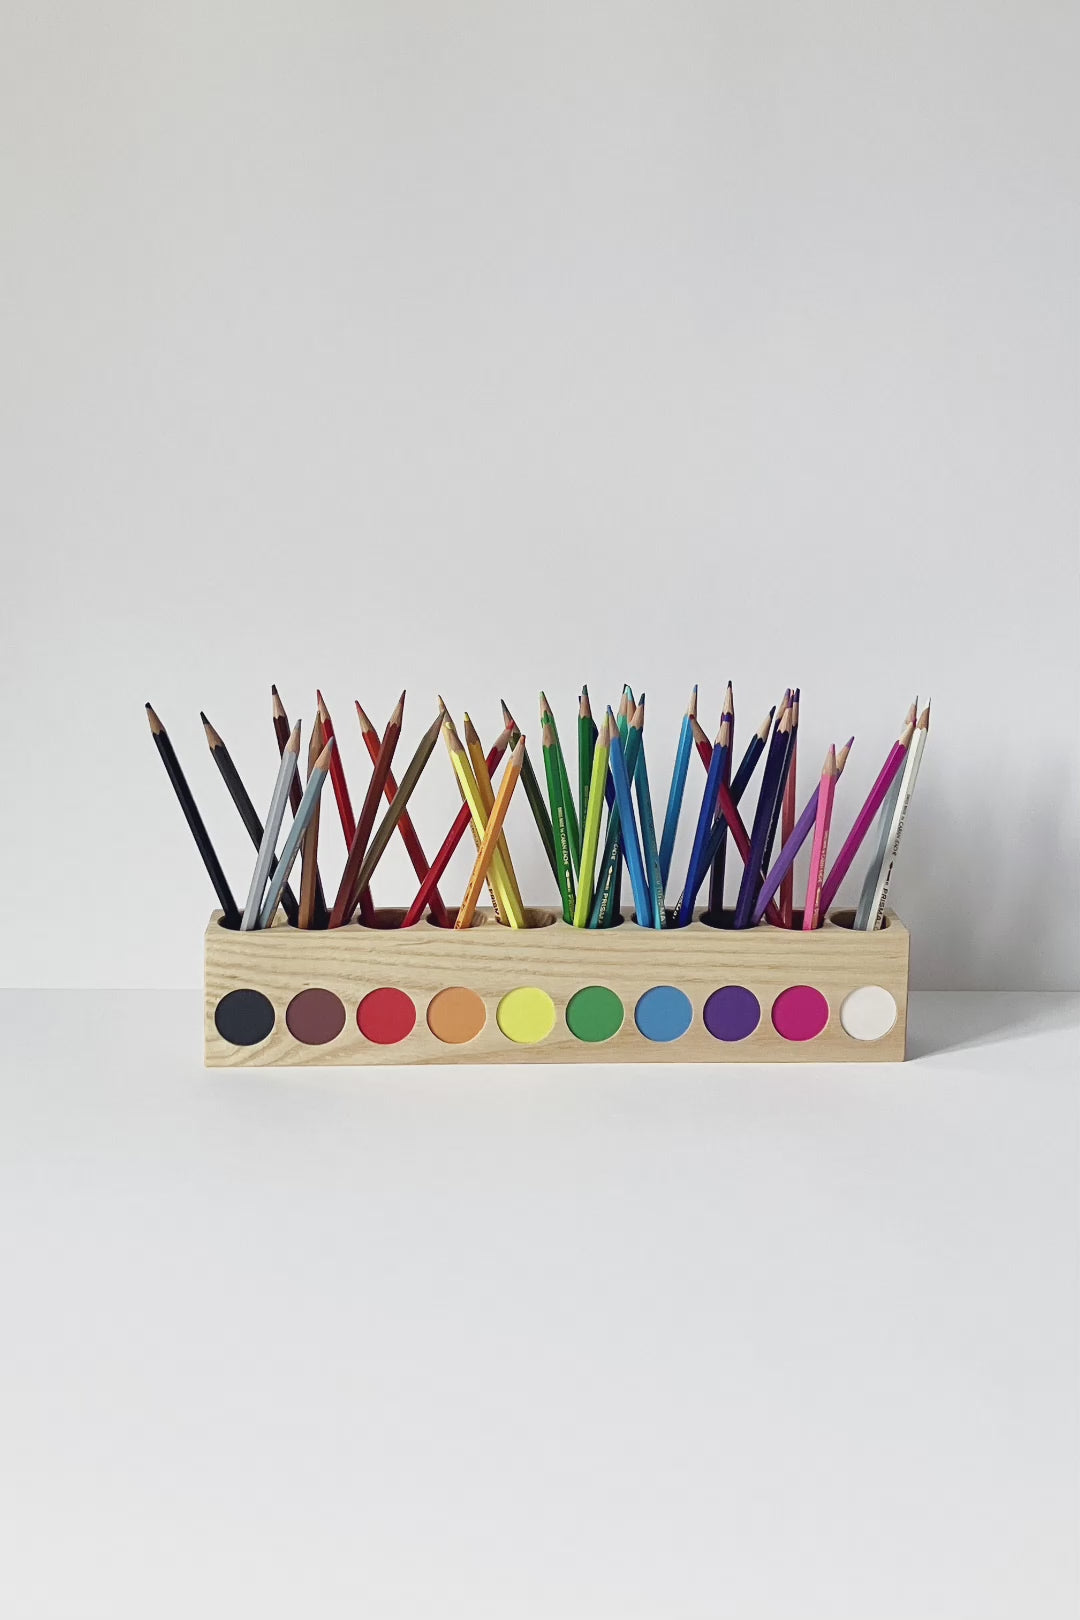 Double sided montessori pencil holder, rotating gif.